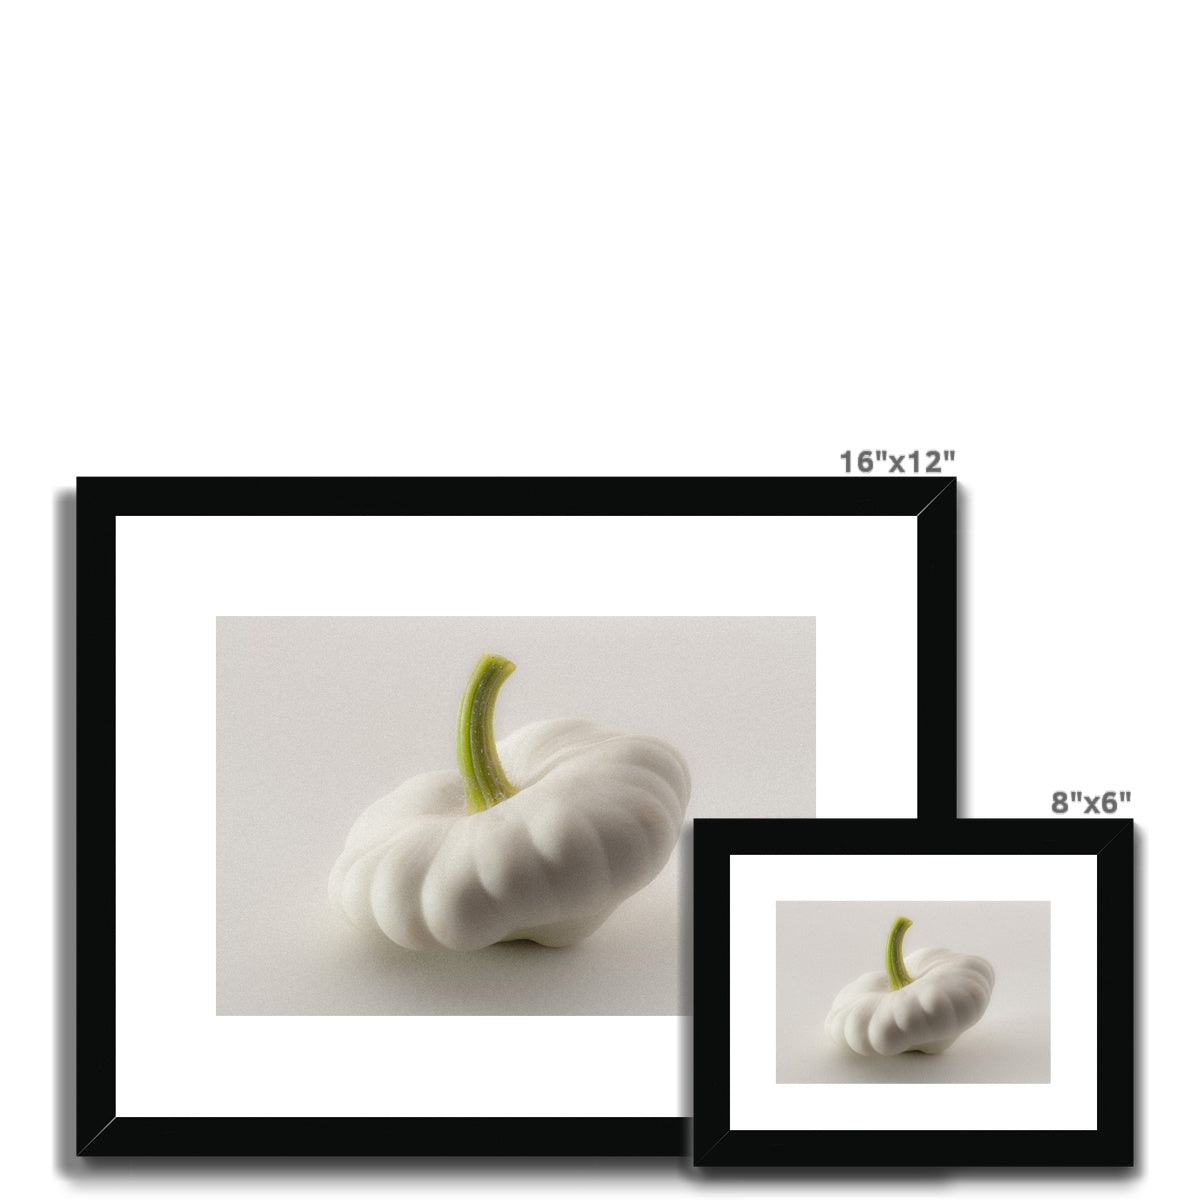 White pattypan squash on a white background Framed & Mounted Print